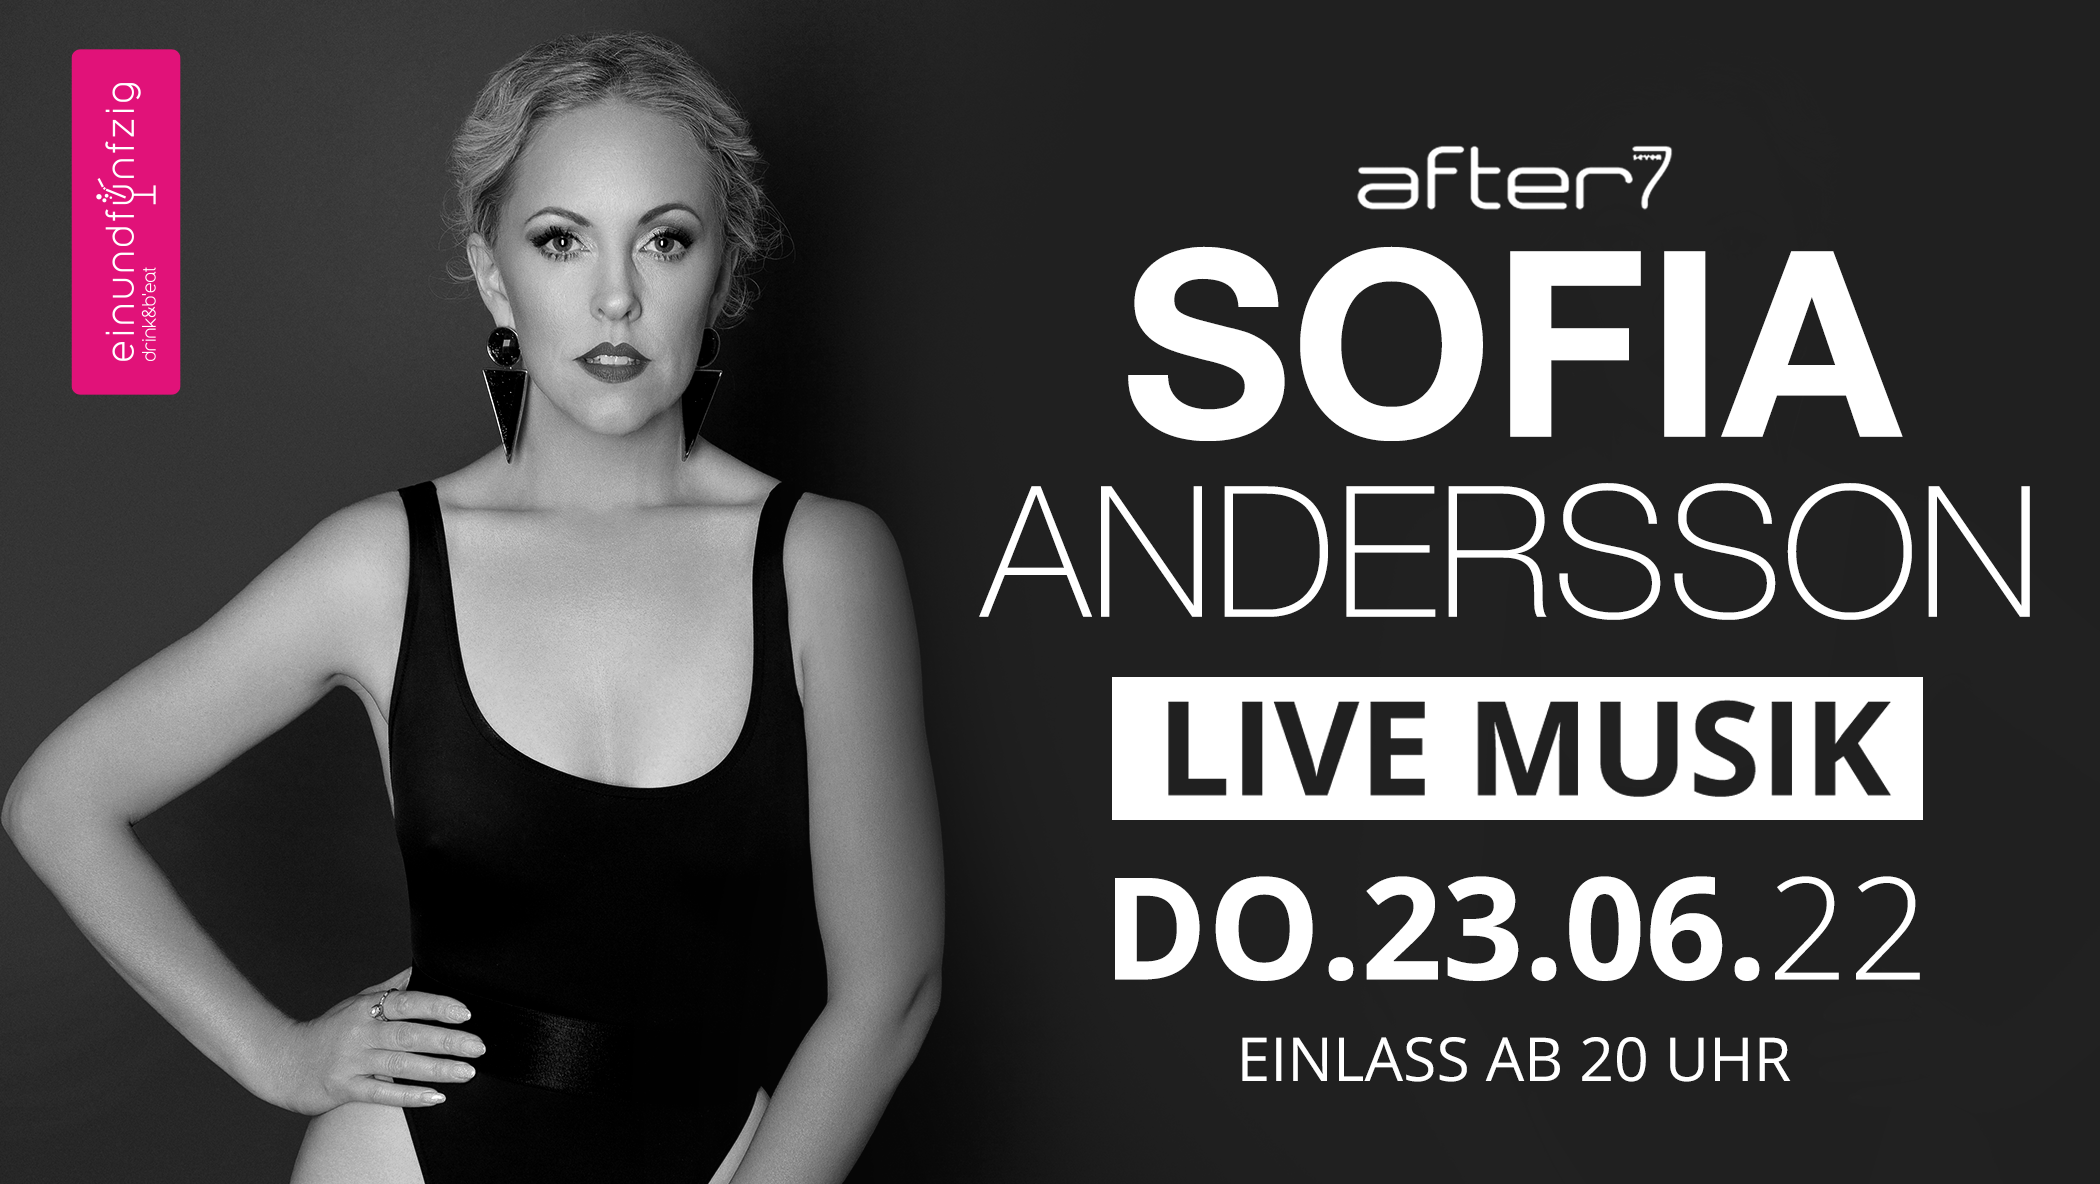 23.06.2022 – Sofia Andersson – After7